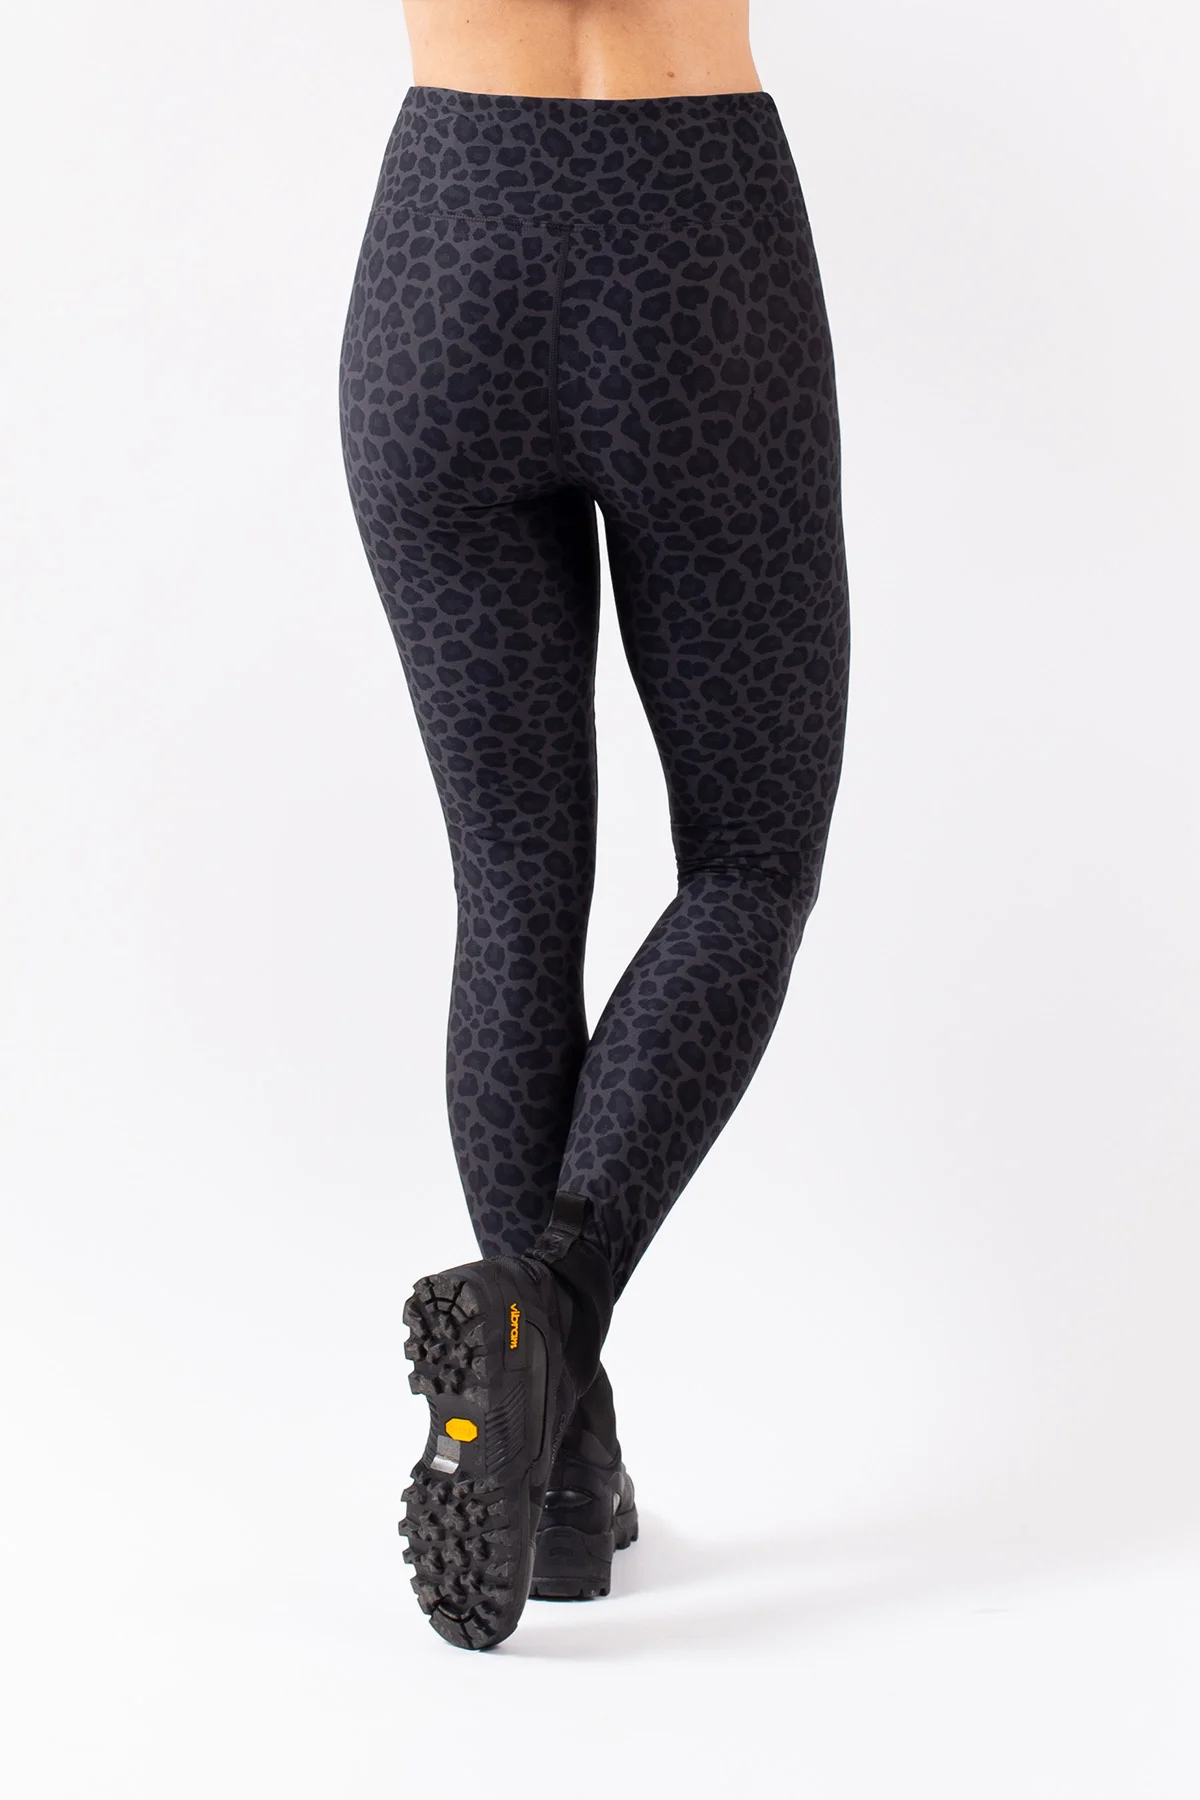 Icecold Tights - Black Leopard